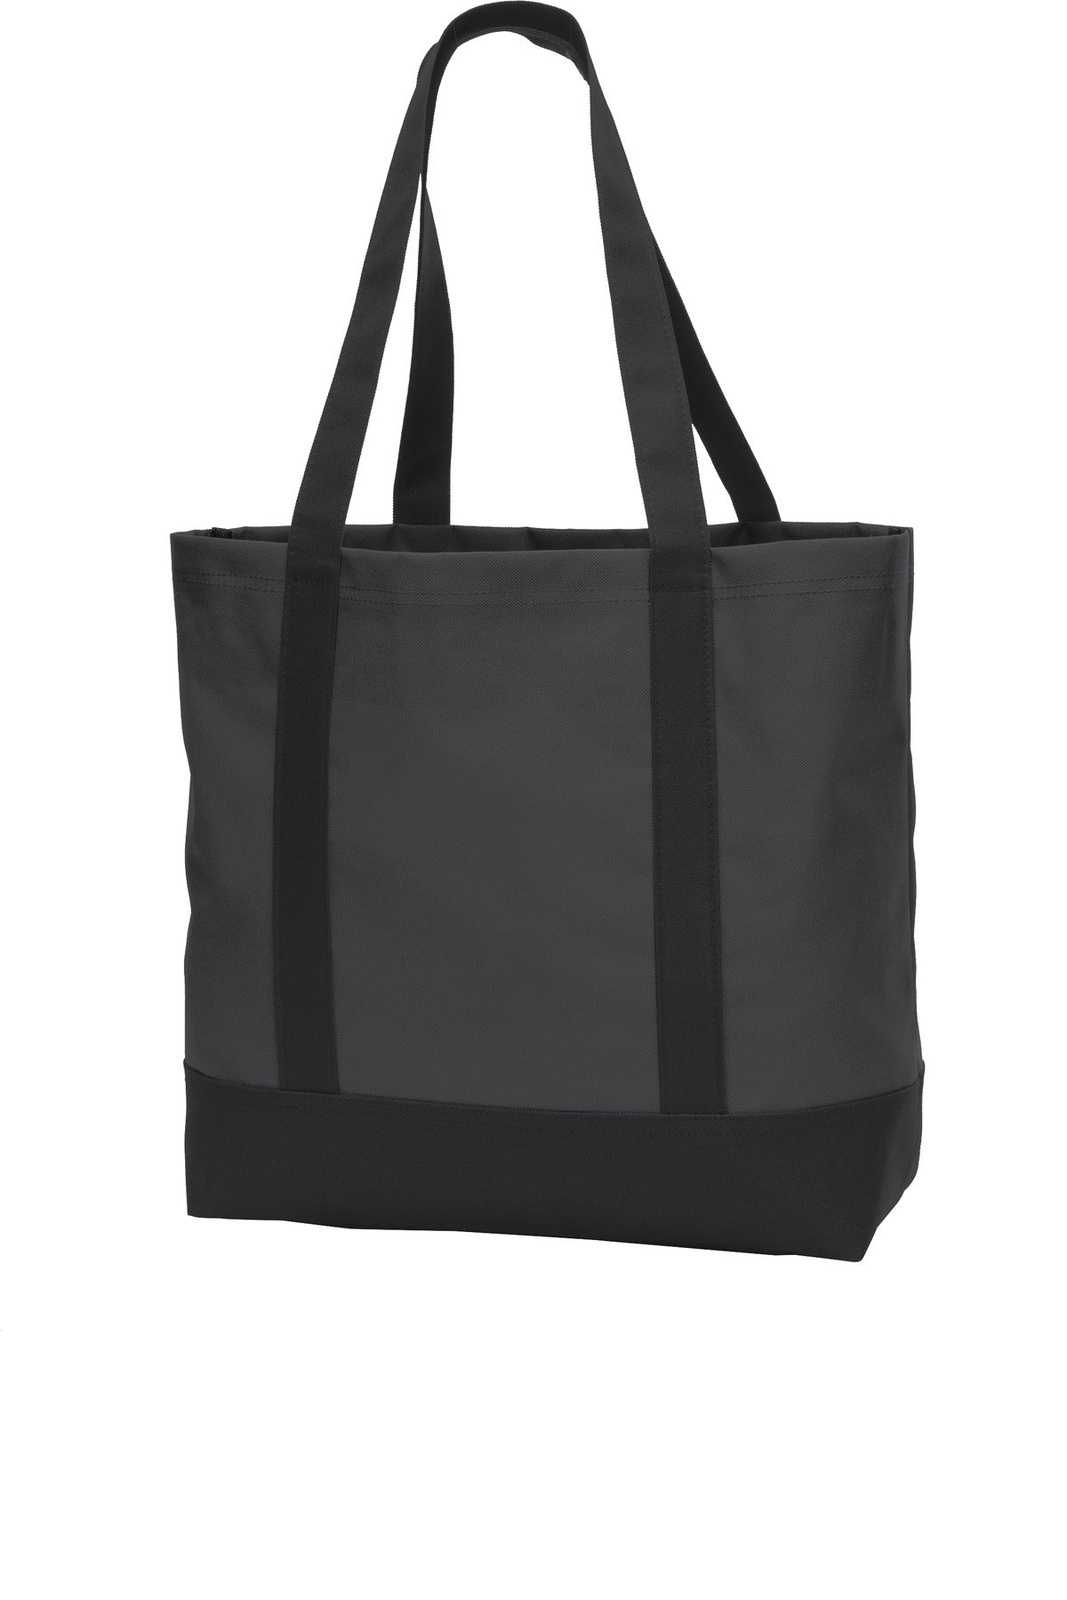 Port Authority BG406 Day Tote - Dark Charcoal Black - HIT a Double - 1